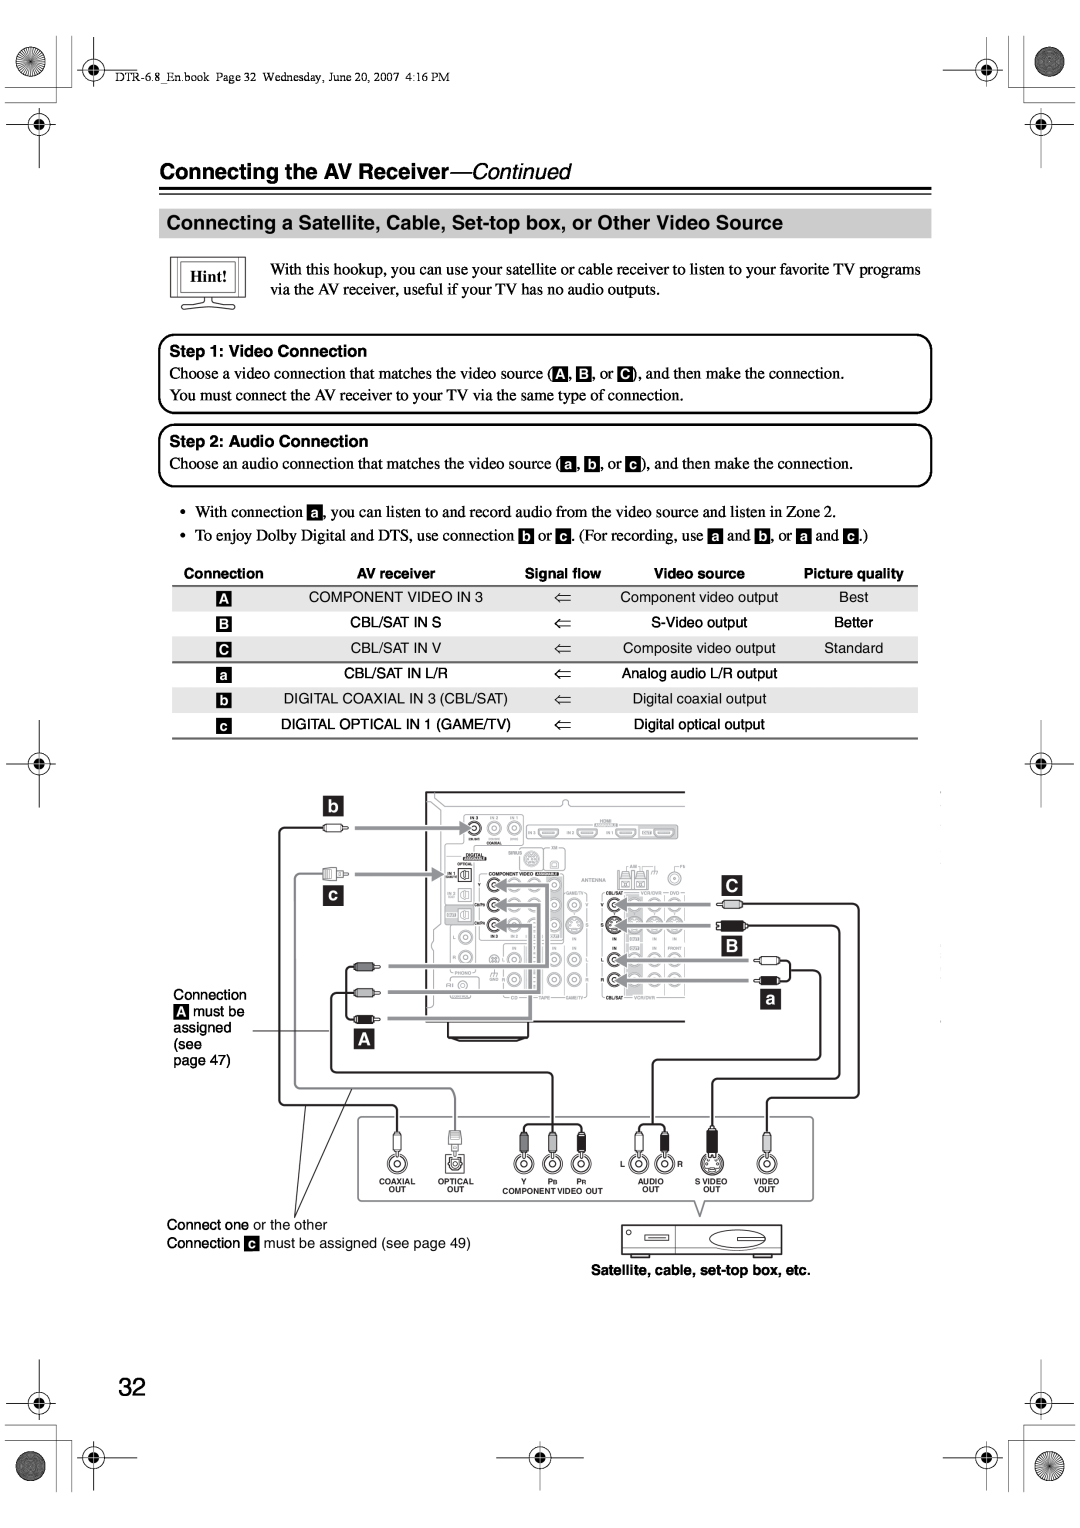 Integra DTR-6.8 instruction manual Connecting the AV Receiver—Continued, Hint, Satellite, cable, set-topbox, etc 